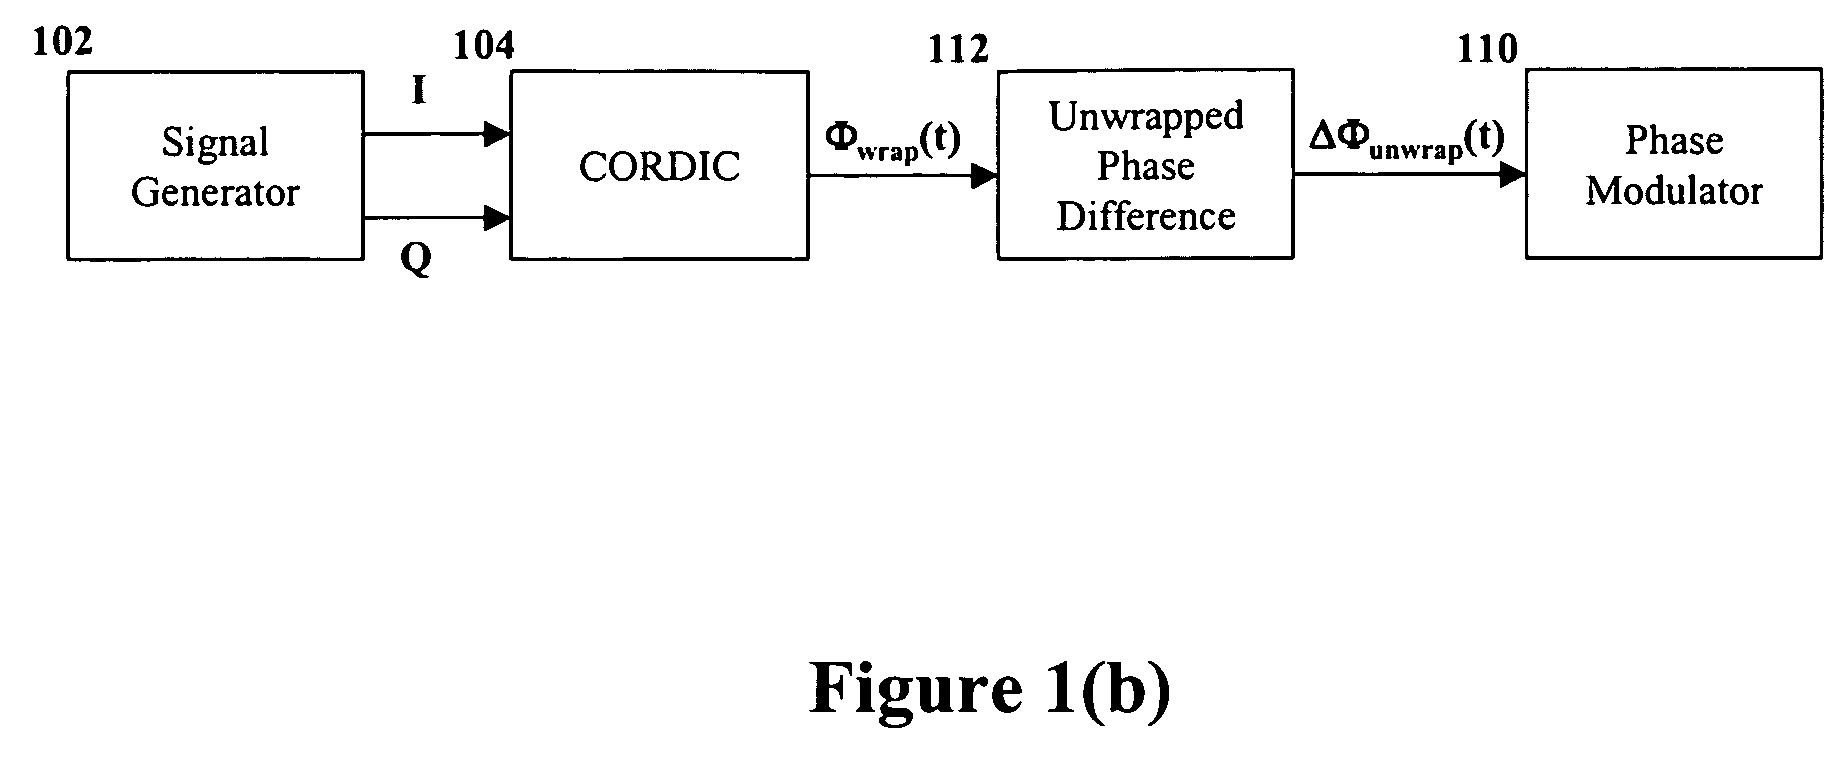 Apparatus, methods and articles of manufacture for signal propagation using unwrapped phase